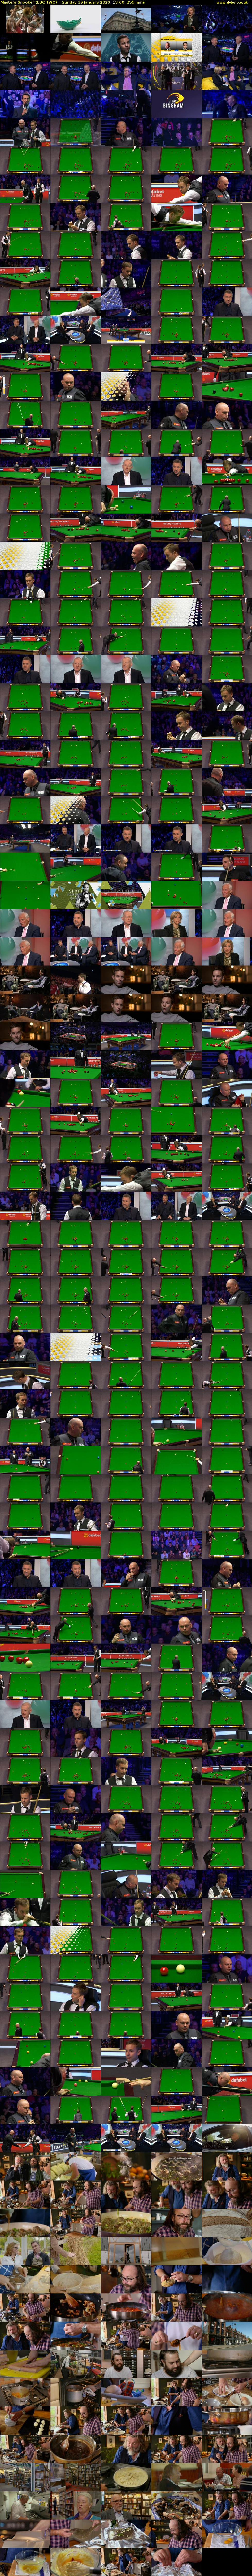 Masters Snooker (BBC TWO) Sunday 19 January 2020 13:00 - 17:15